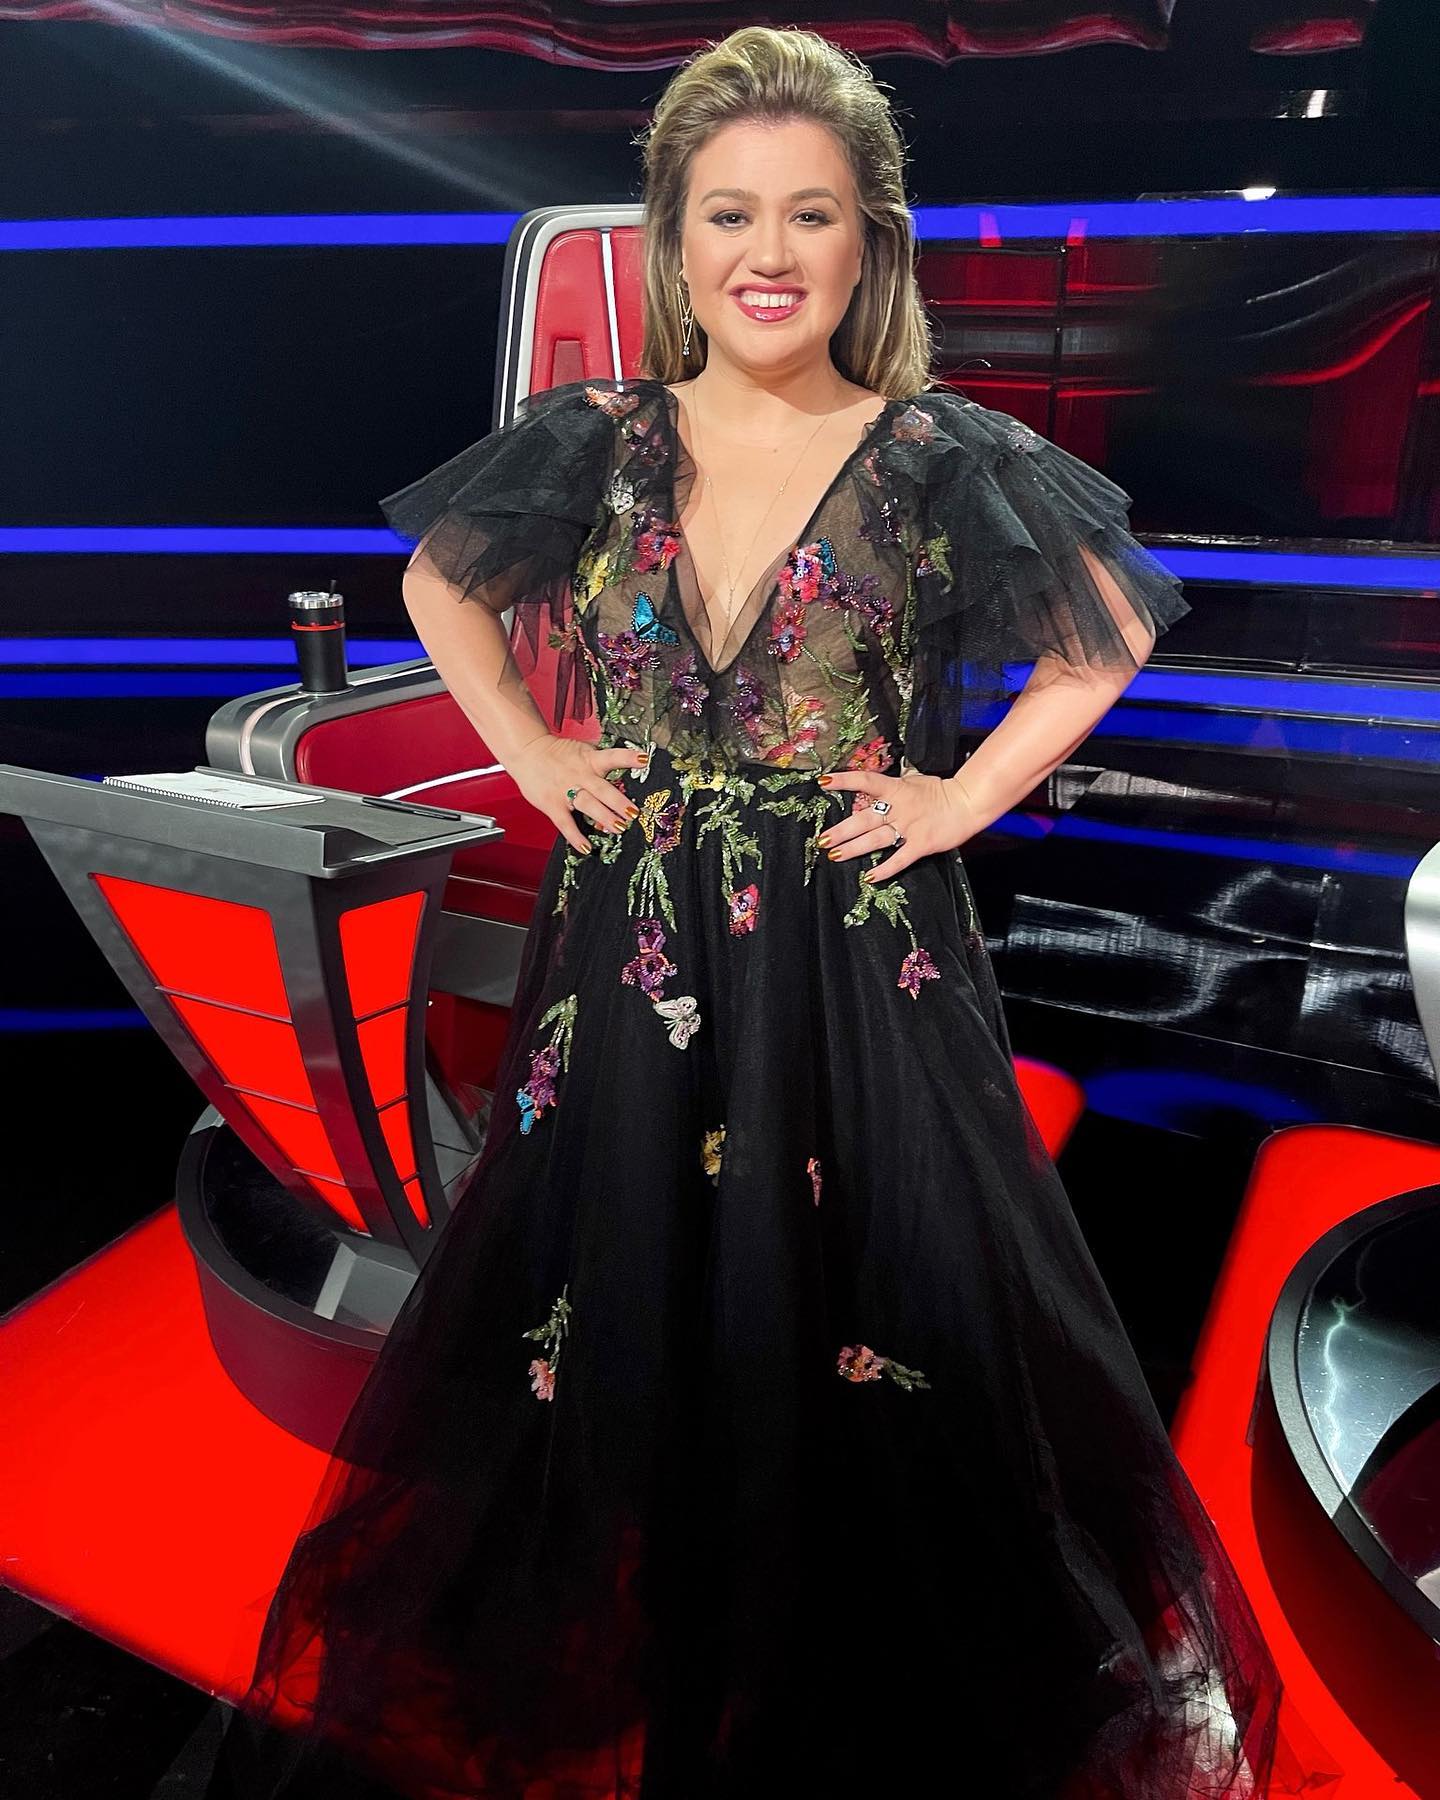 Kelly Clarkson Bio, Net Worth, Age, Height, Weight, Body Measurements, Bra Size, Bust Size, Waist Size, Hips Size, Career